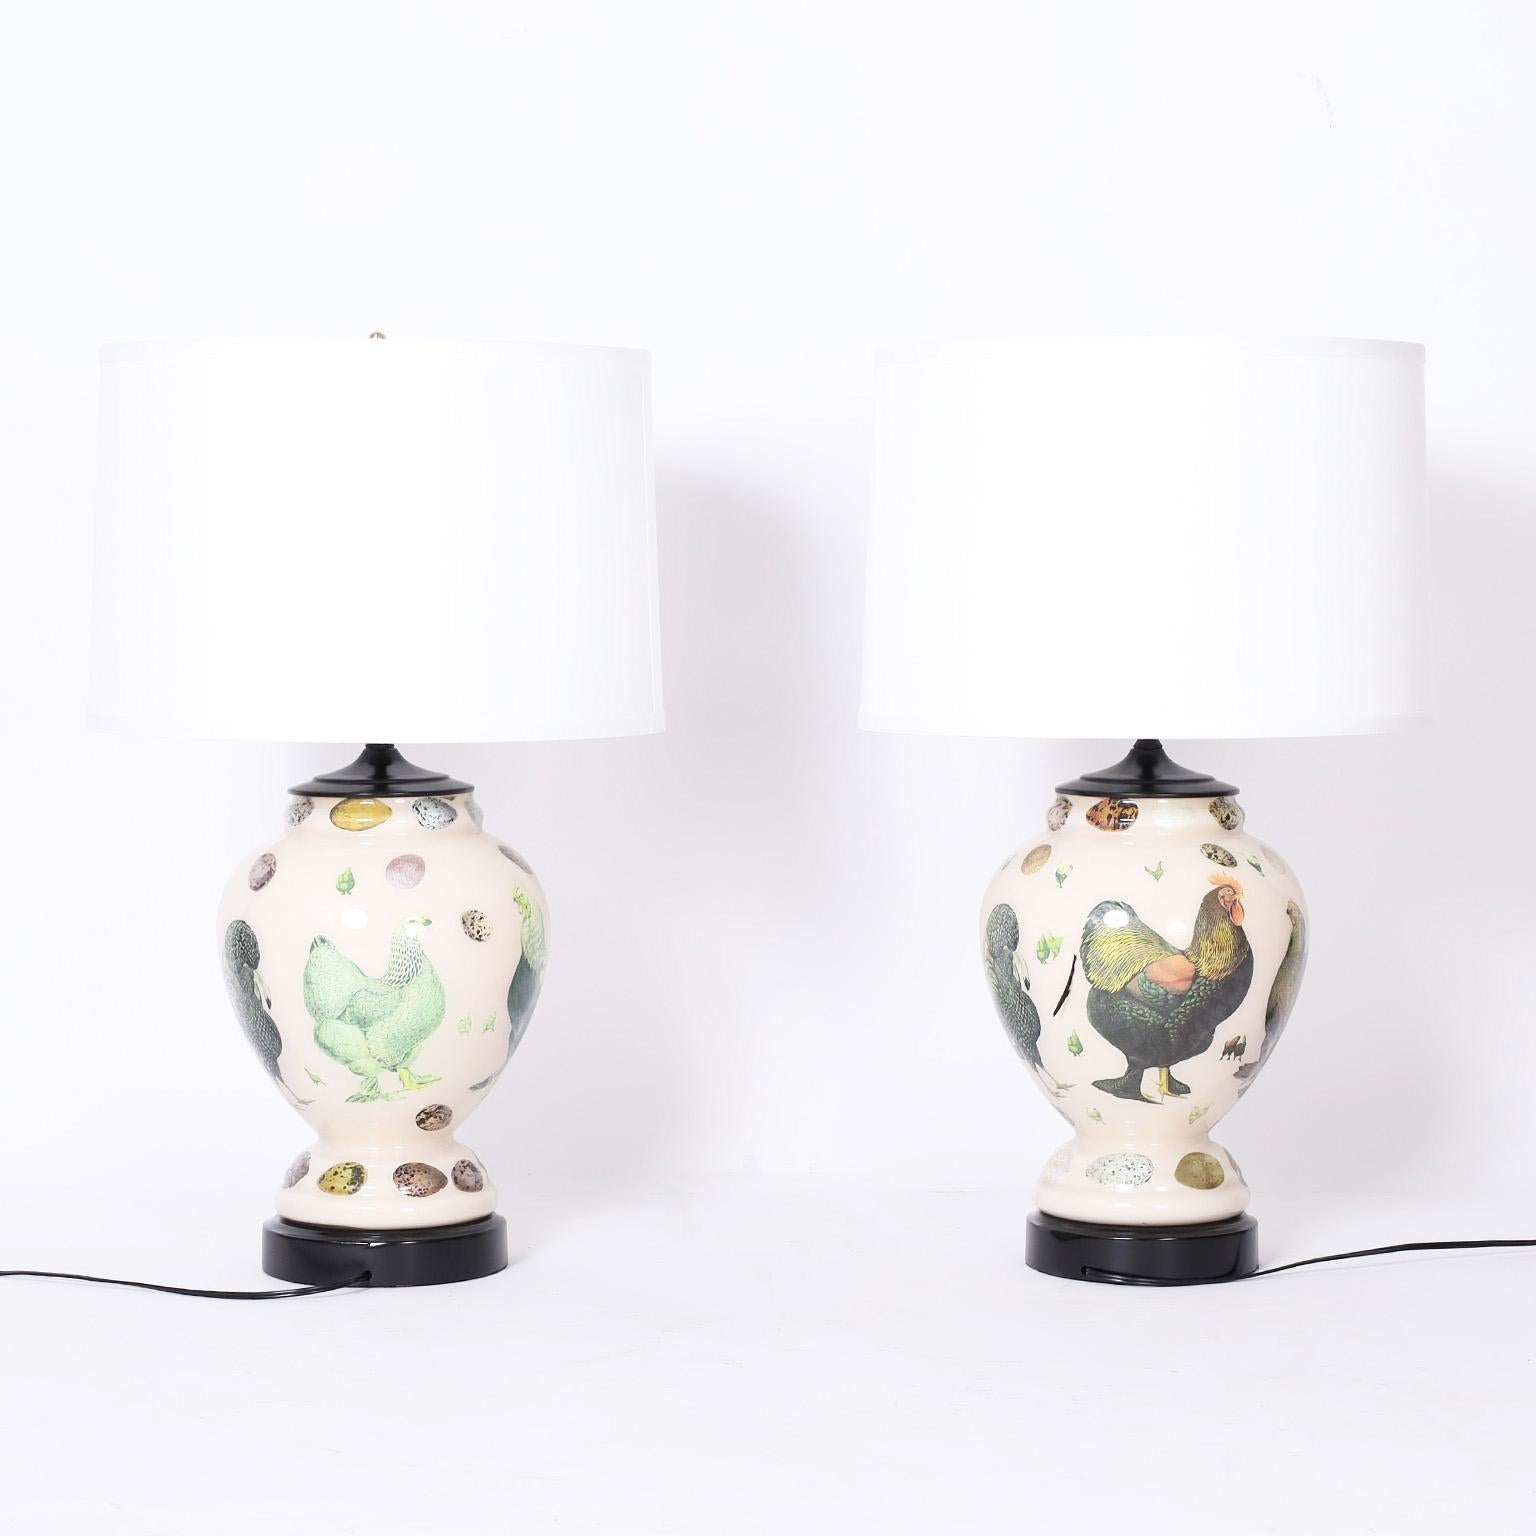 Charming pair of table lamps with classic form decorated with a reverse decoupage technique under glass of roosters and eggs on an off white background.